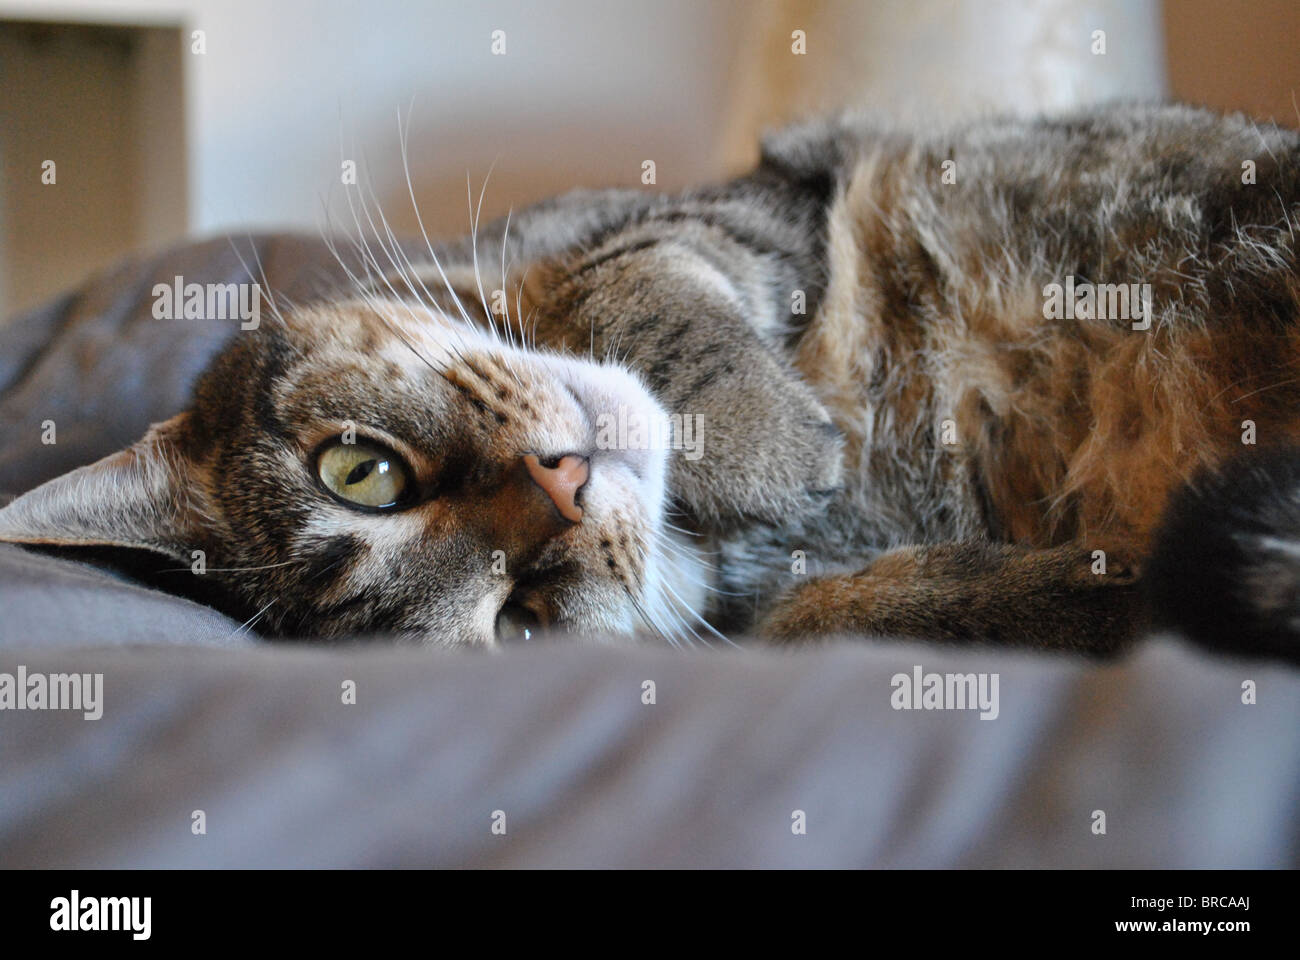 Stripy adult cat lying on her side, twisting her head upside down and looking into the camera. Stock Photo